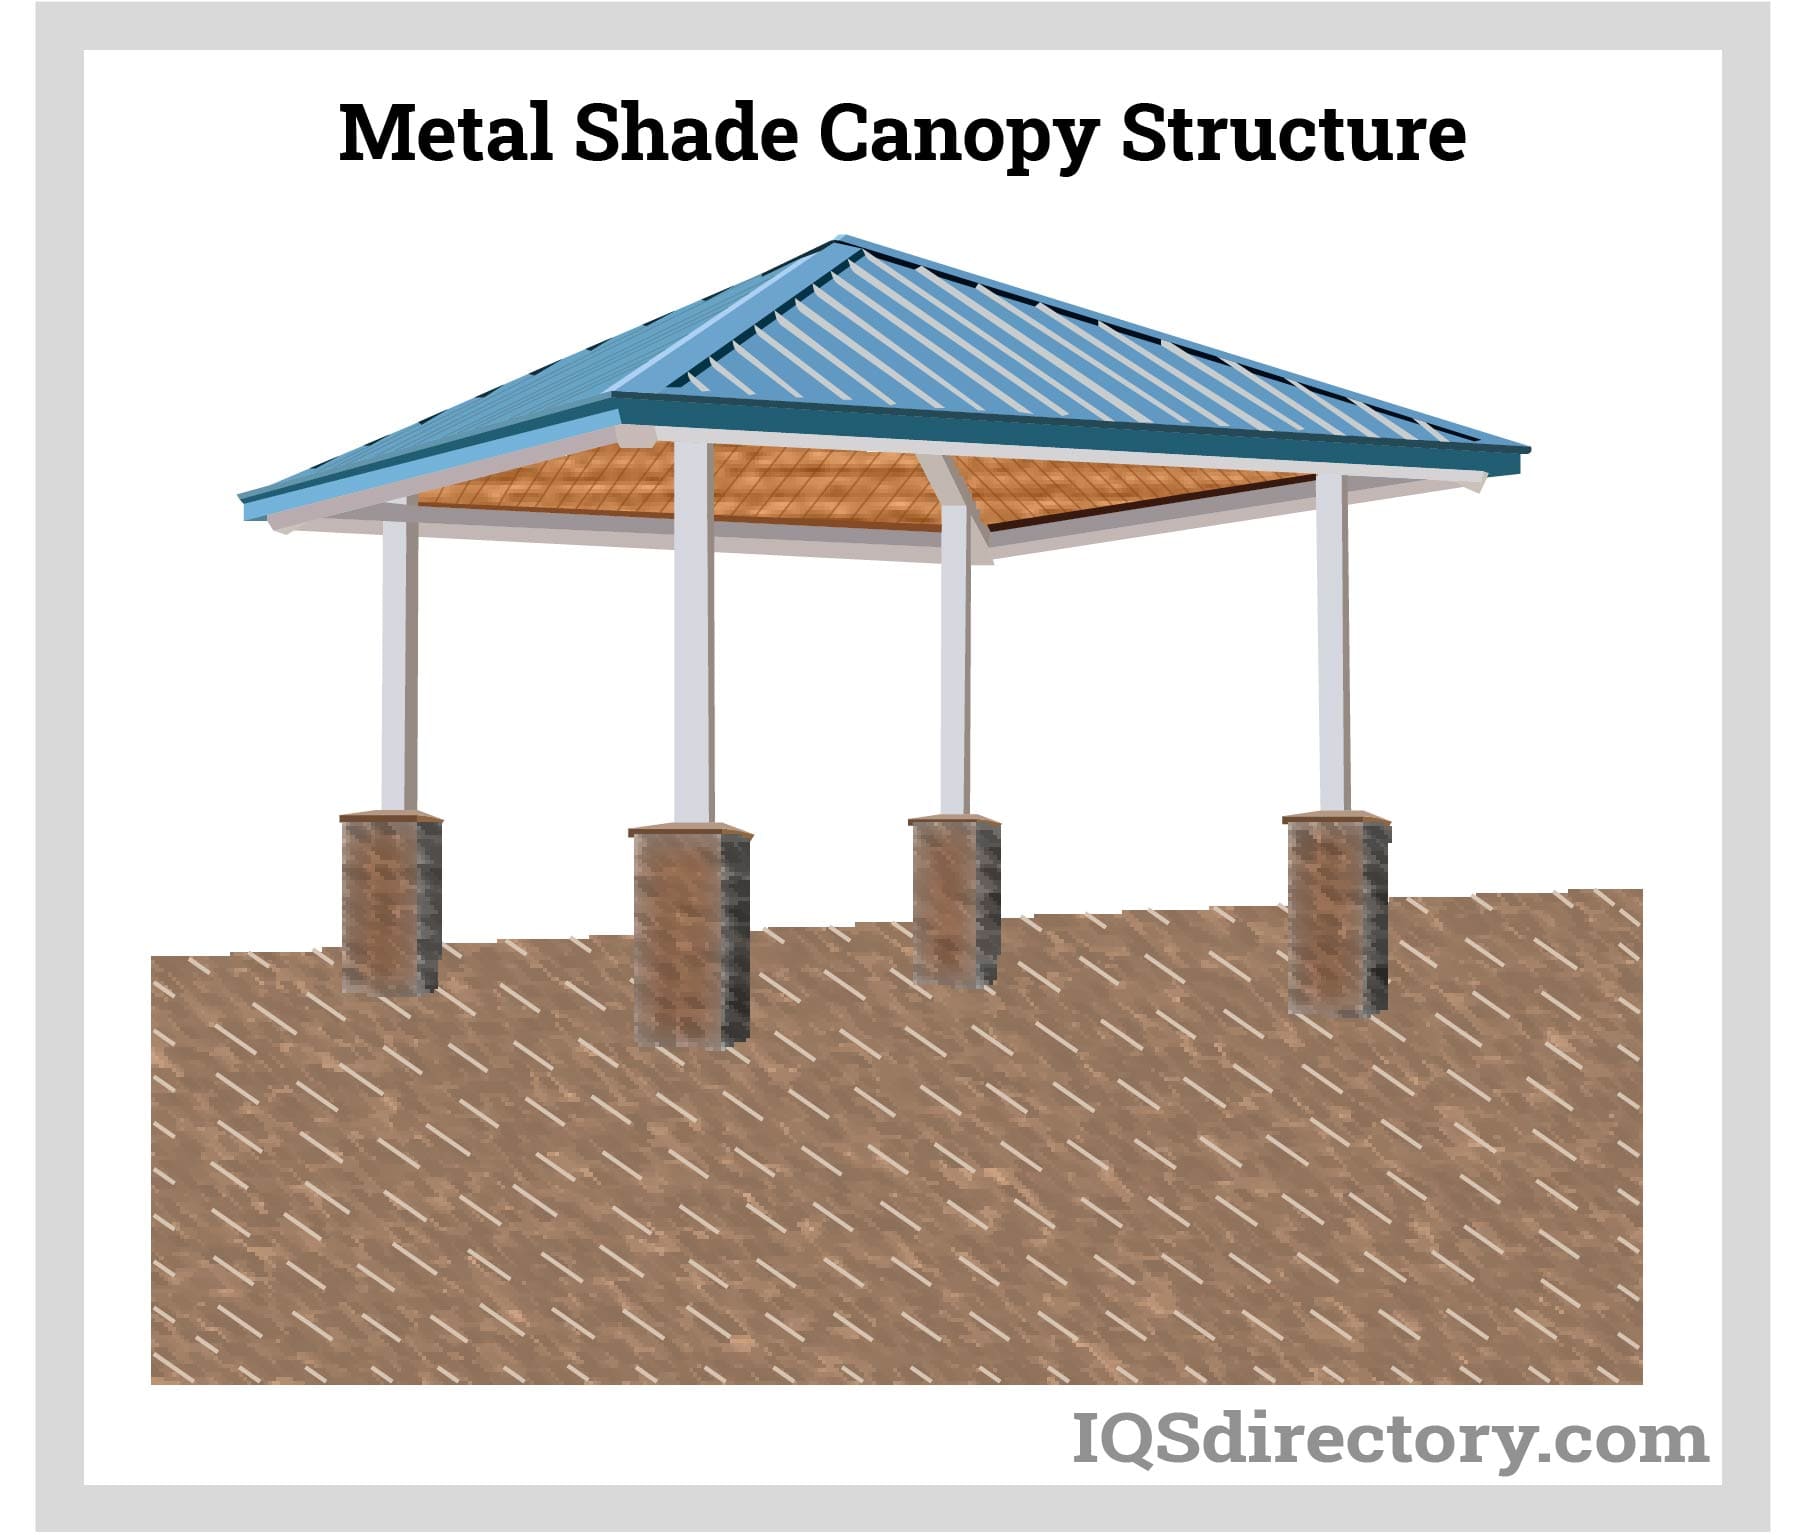 Metal Shade Canopy Structure